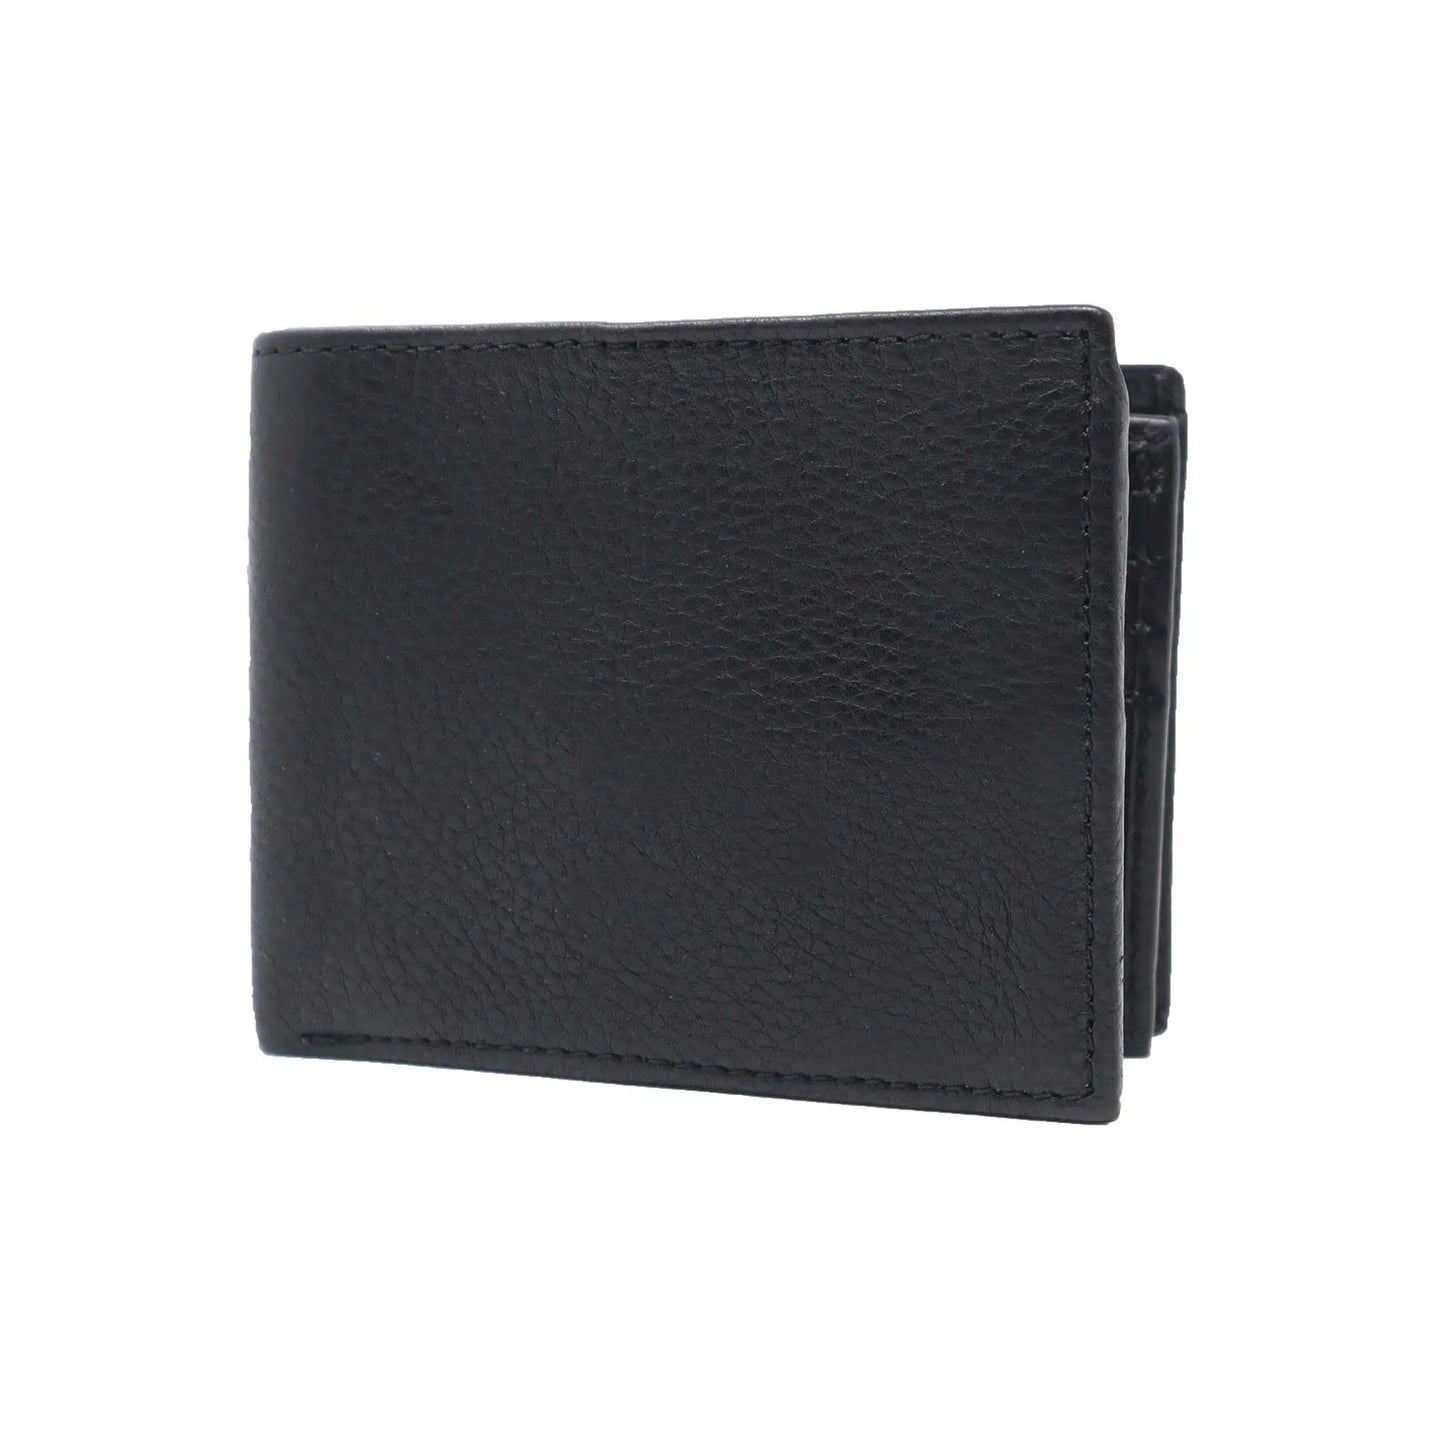 RFID Black Tri-Fold Leather Wallet - Larimars Clothing Men's Formal and casual wear shirts